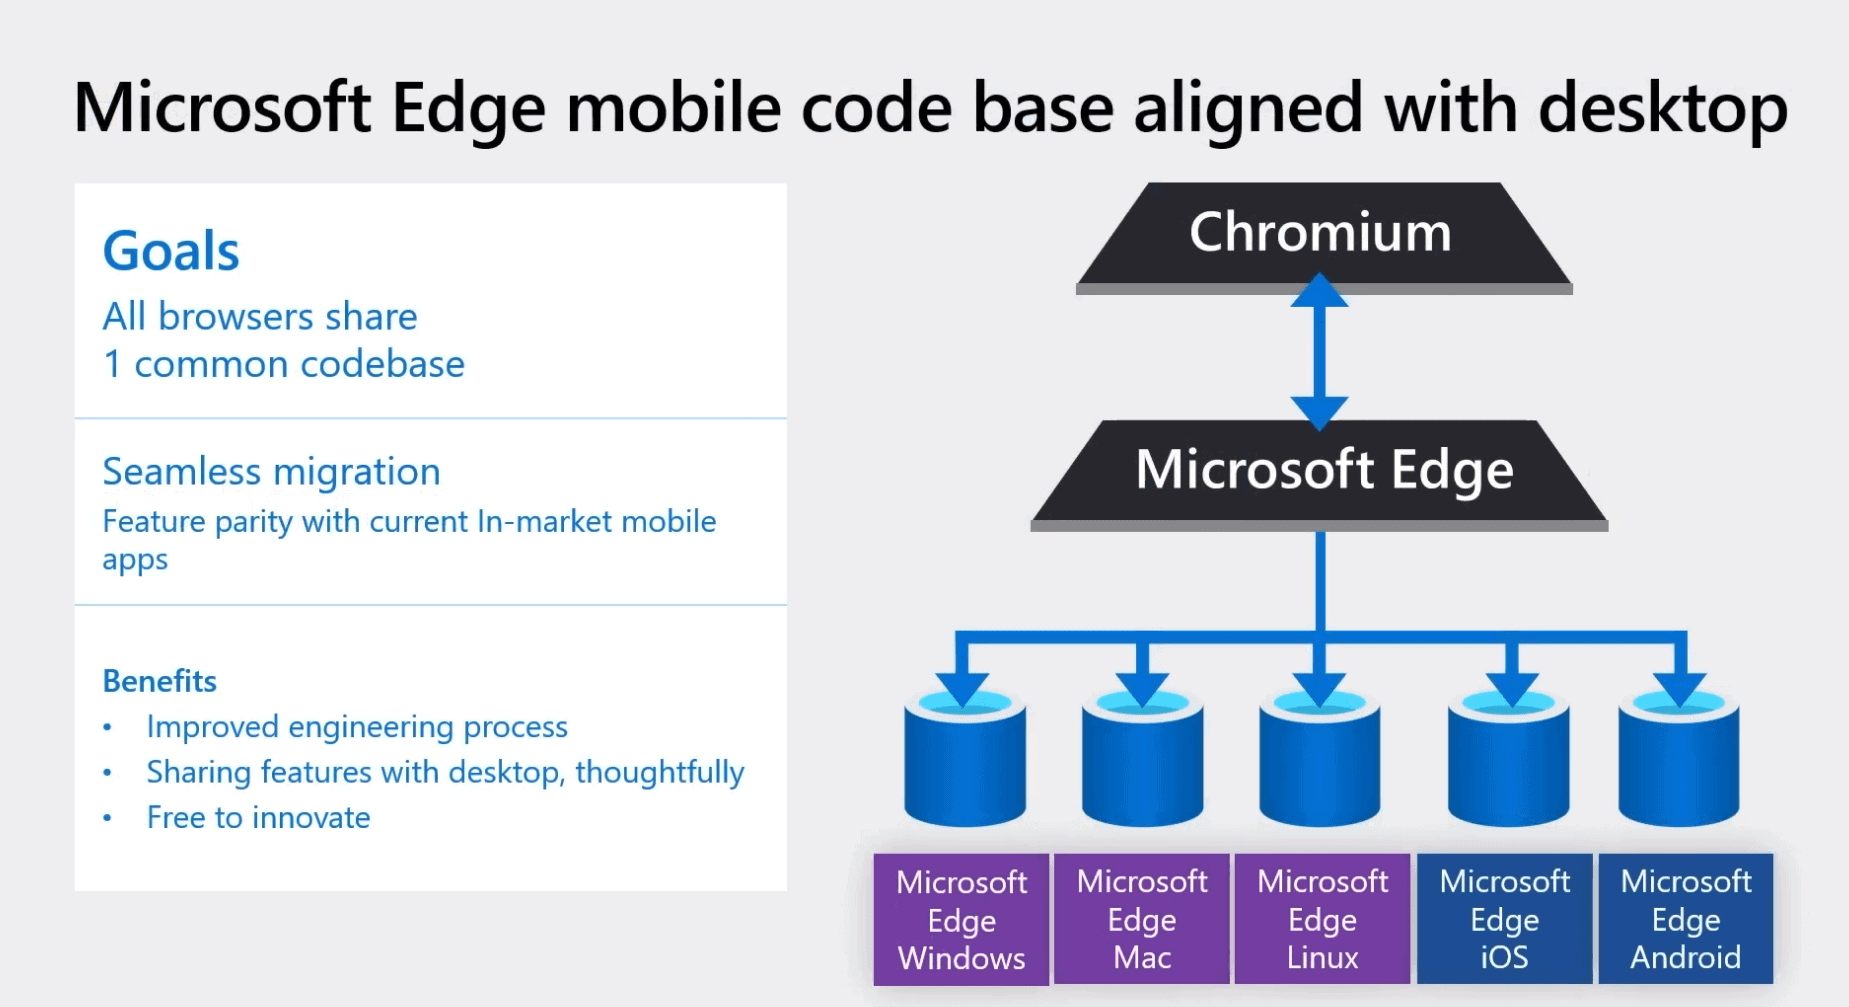 Microsoft plans to align all Edge codebases later this year